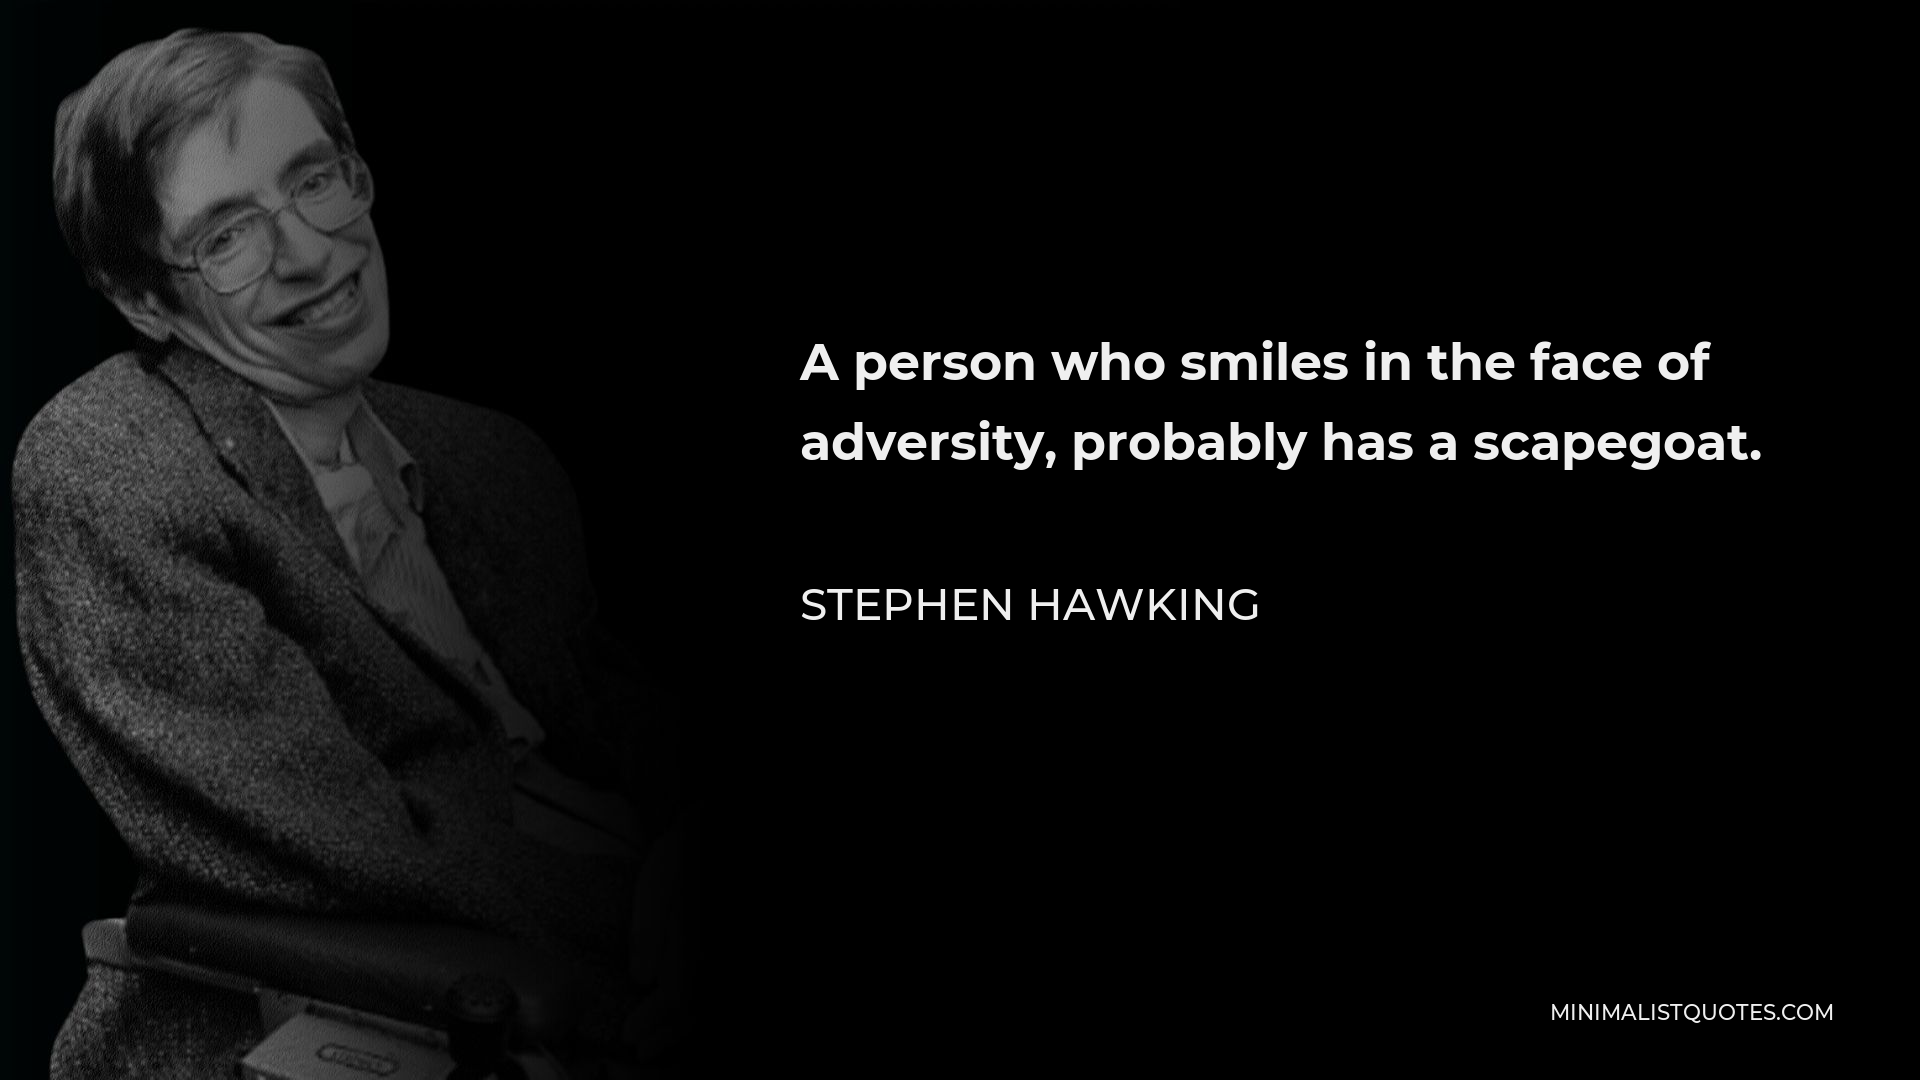 Stephen Hawking Quote - A person who smiles in the face of adversity, probably has a scapegoat.